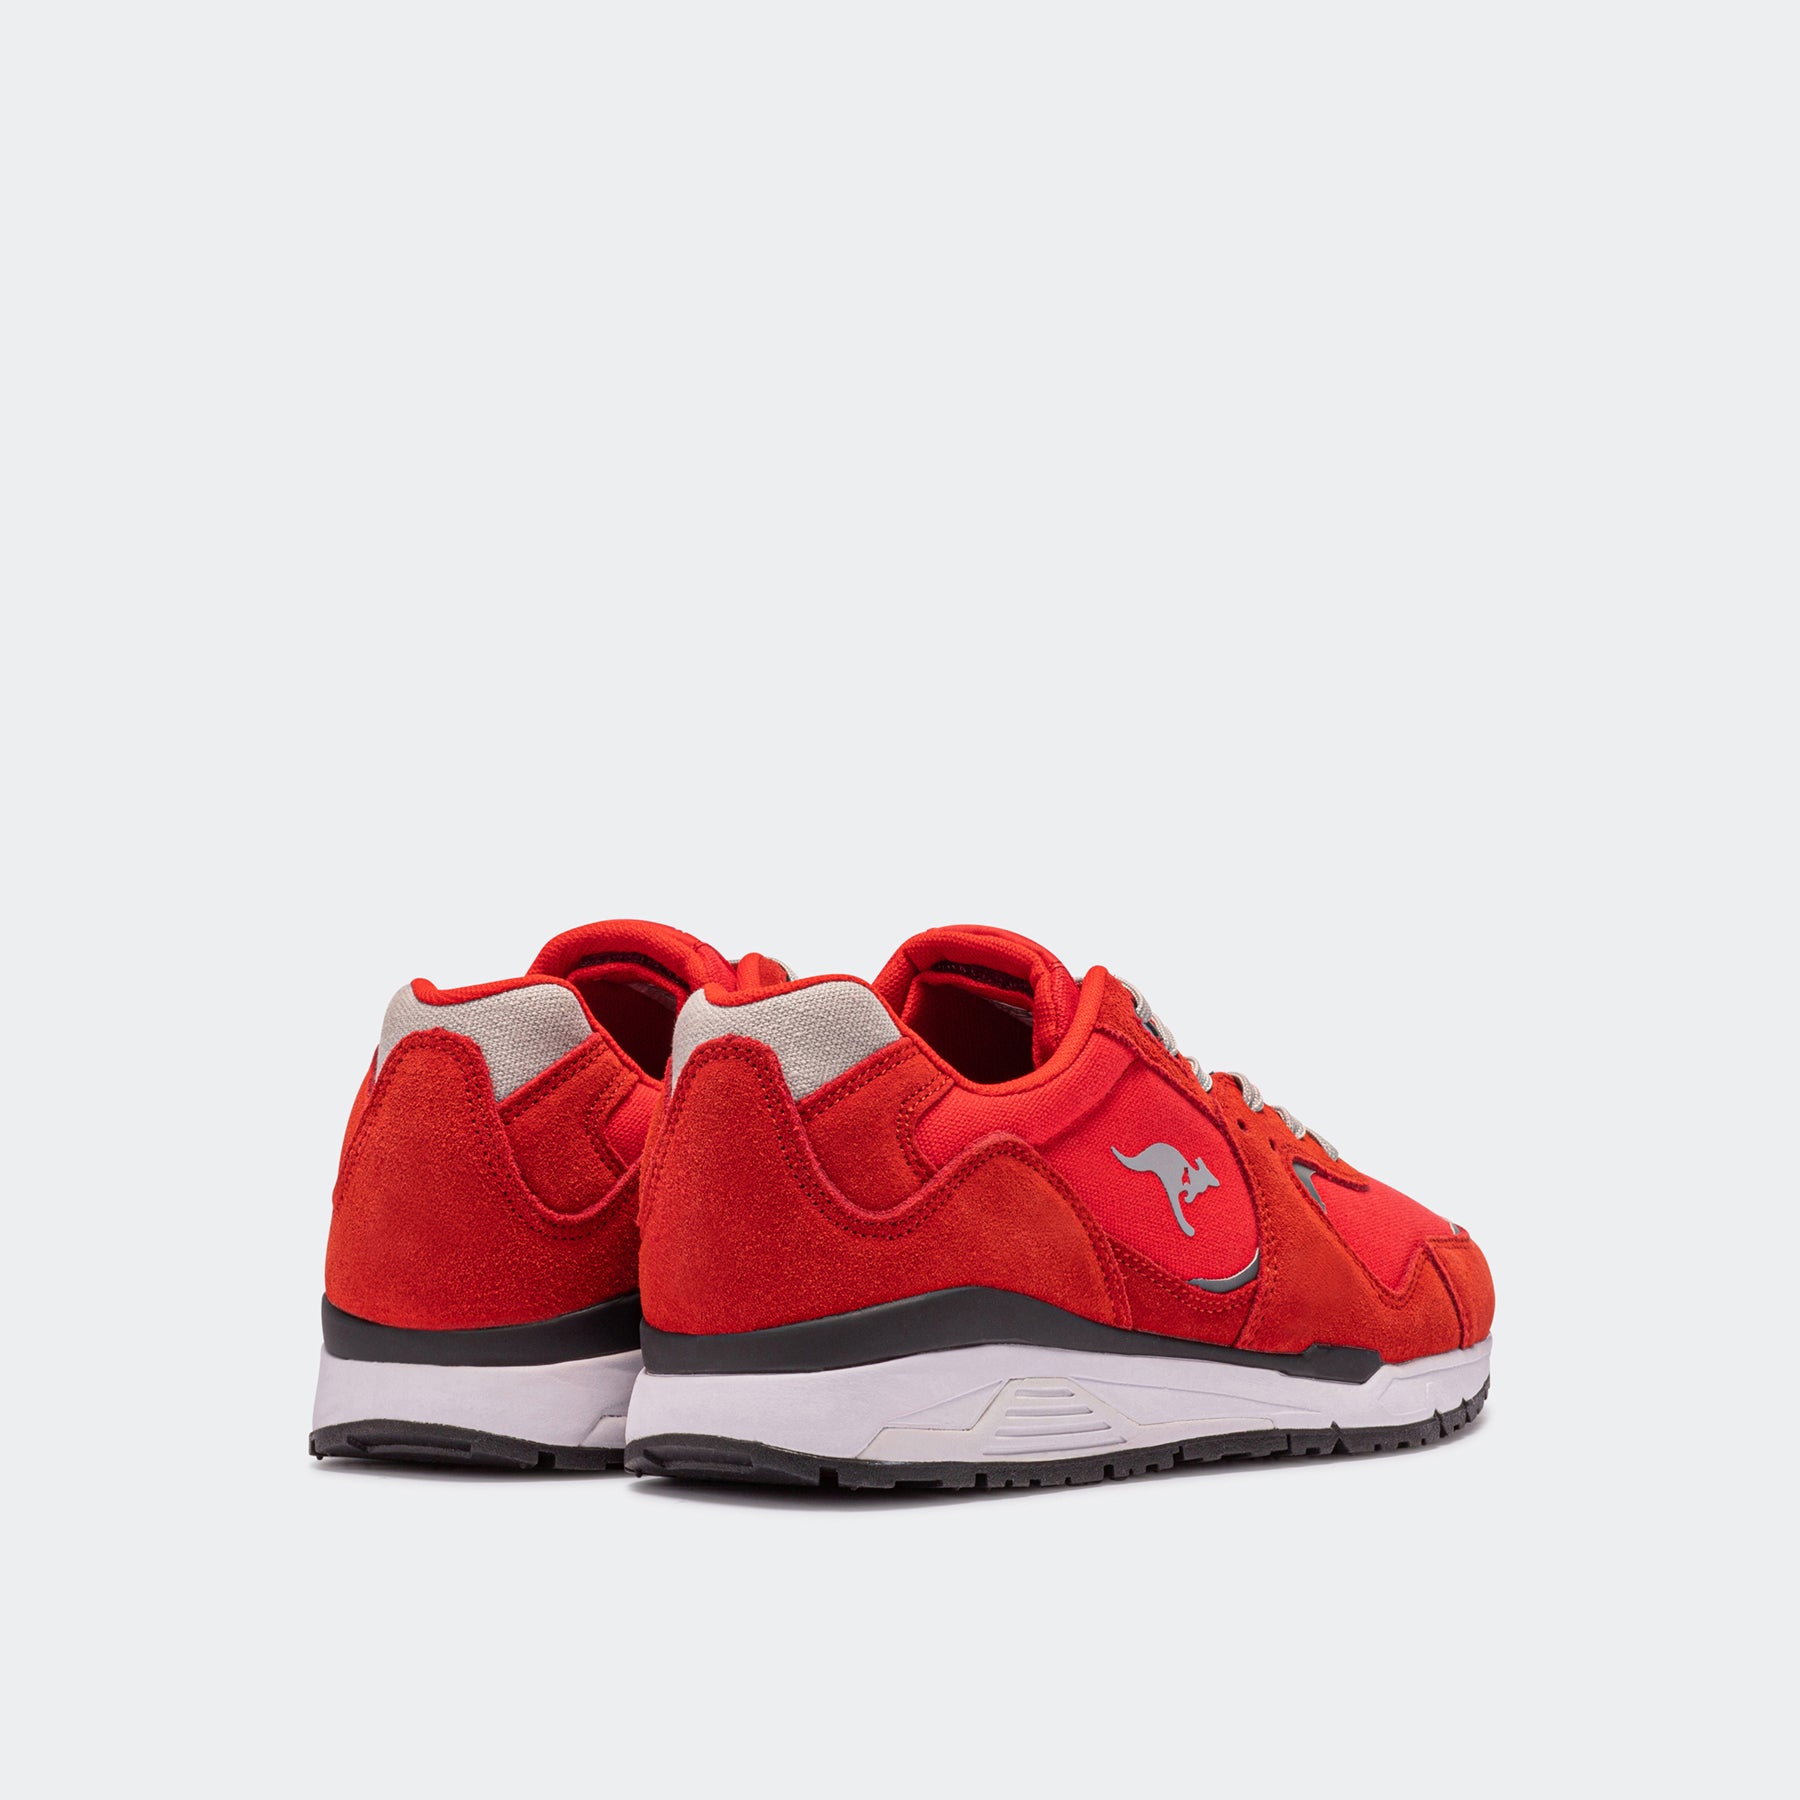 47248_6000_KangaROOS RED - Coil R2 Ultimate, women's sneakers, trend sneakers, high running comfort, high quality workmanship, premium quality, elegant, leisure shoe, KangaROOS, Hummel &Hummelamp; Hummel, men, men sneakers